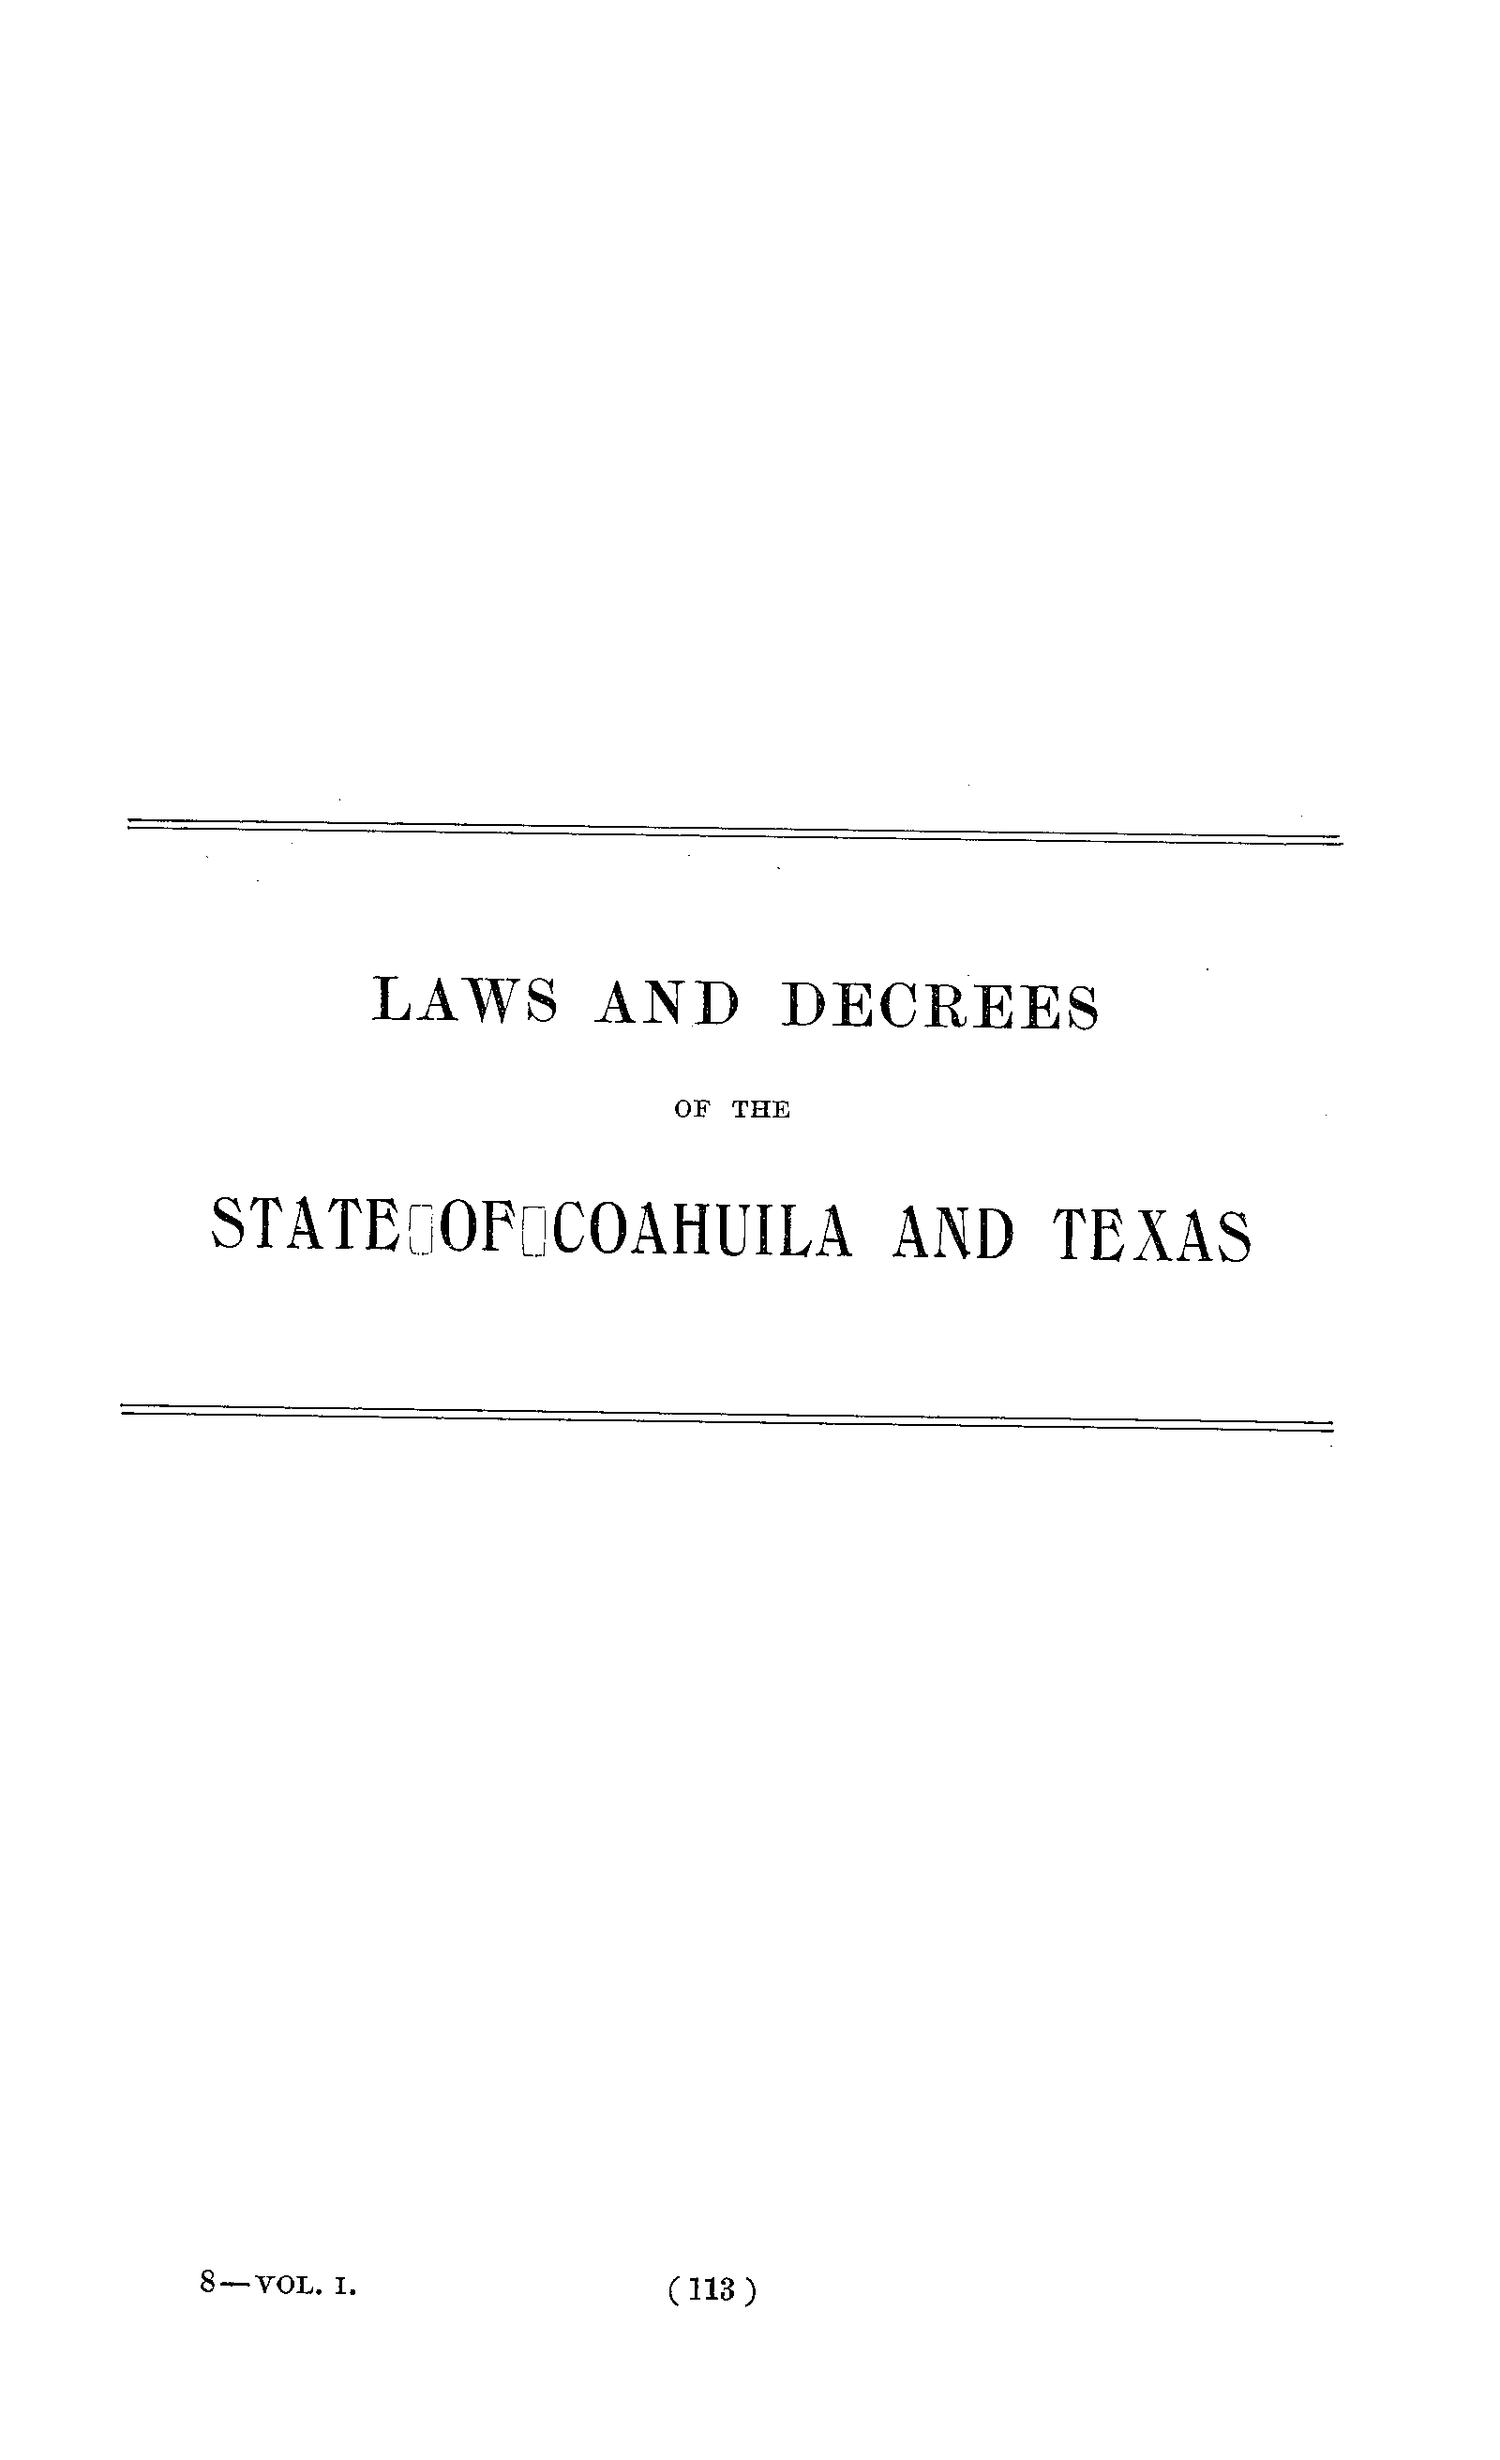 The Laws of Texas, 1822-1897 Volume 1
                                                
                                                    113
                                                